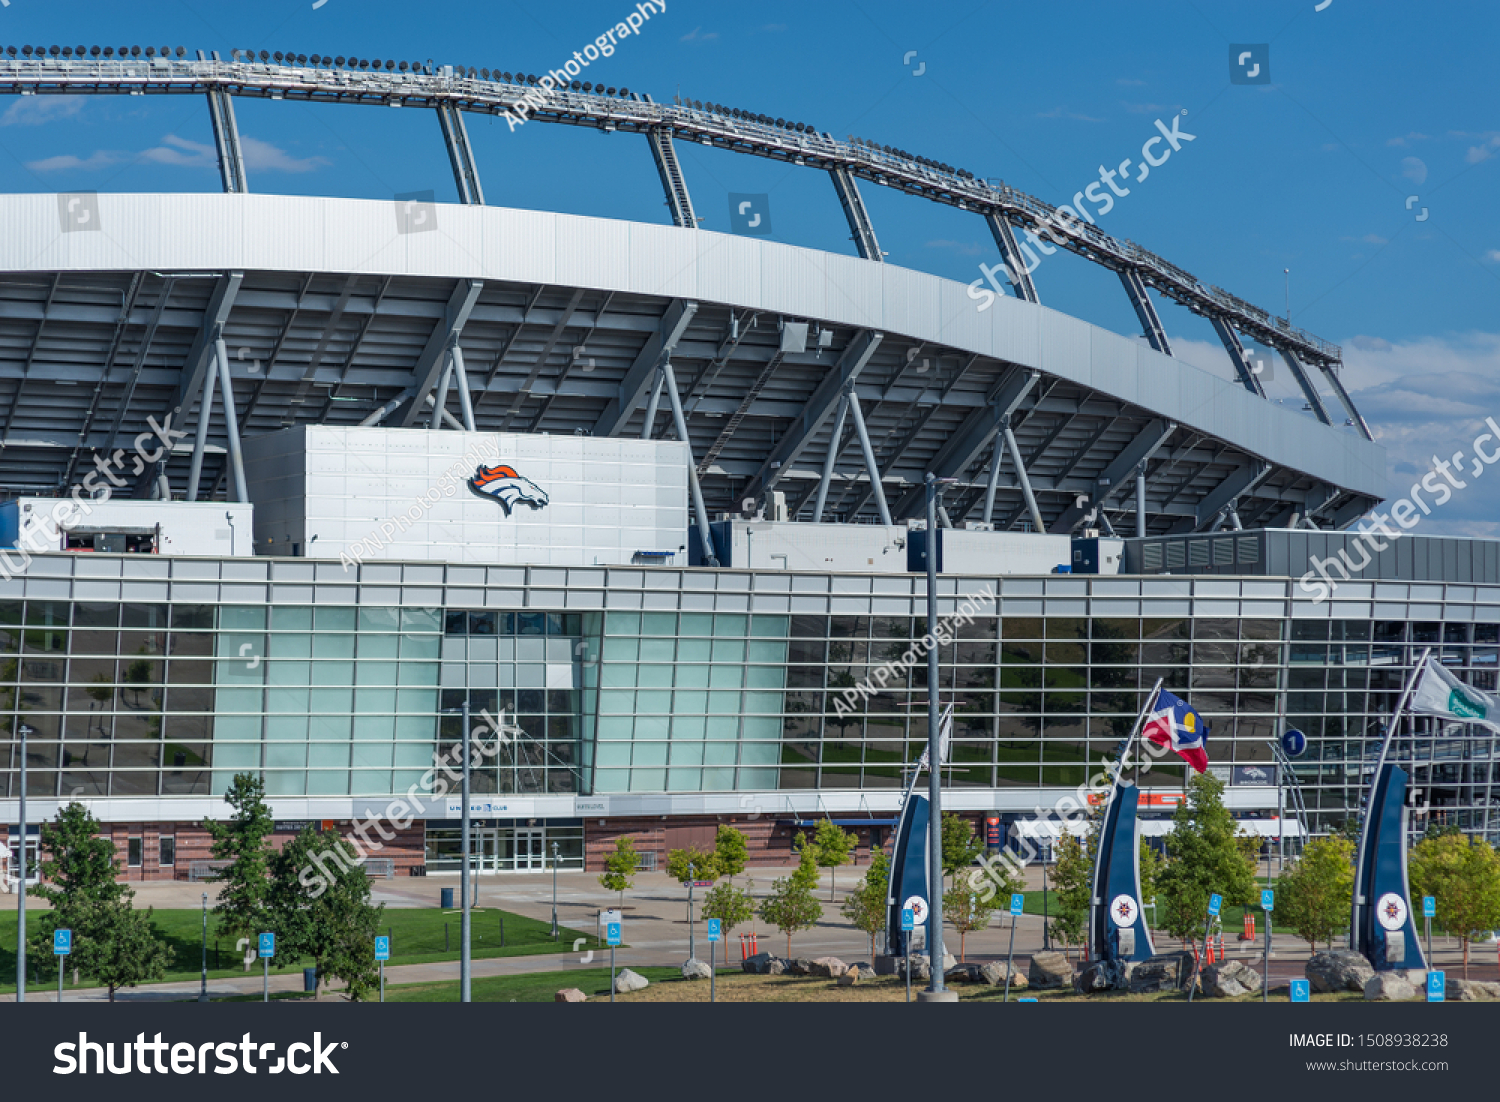 12 Empower field at mile high Images, Stock Photos & Vectors | Shutterstock